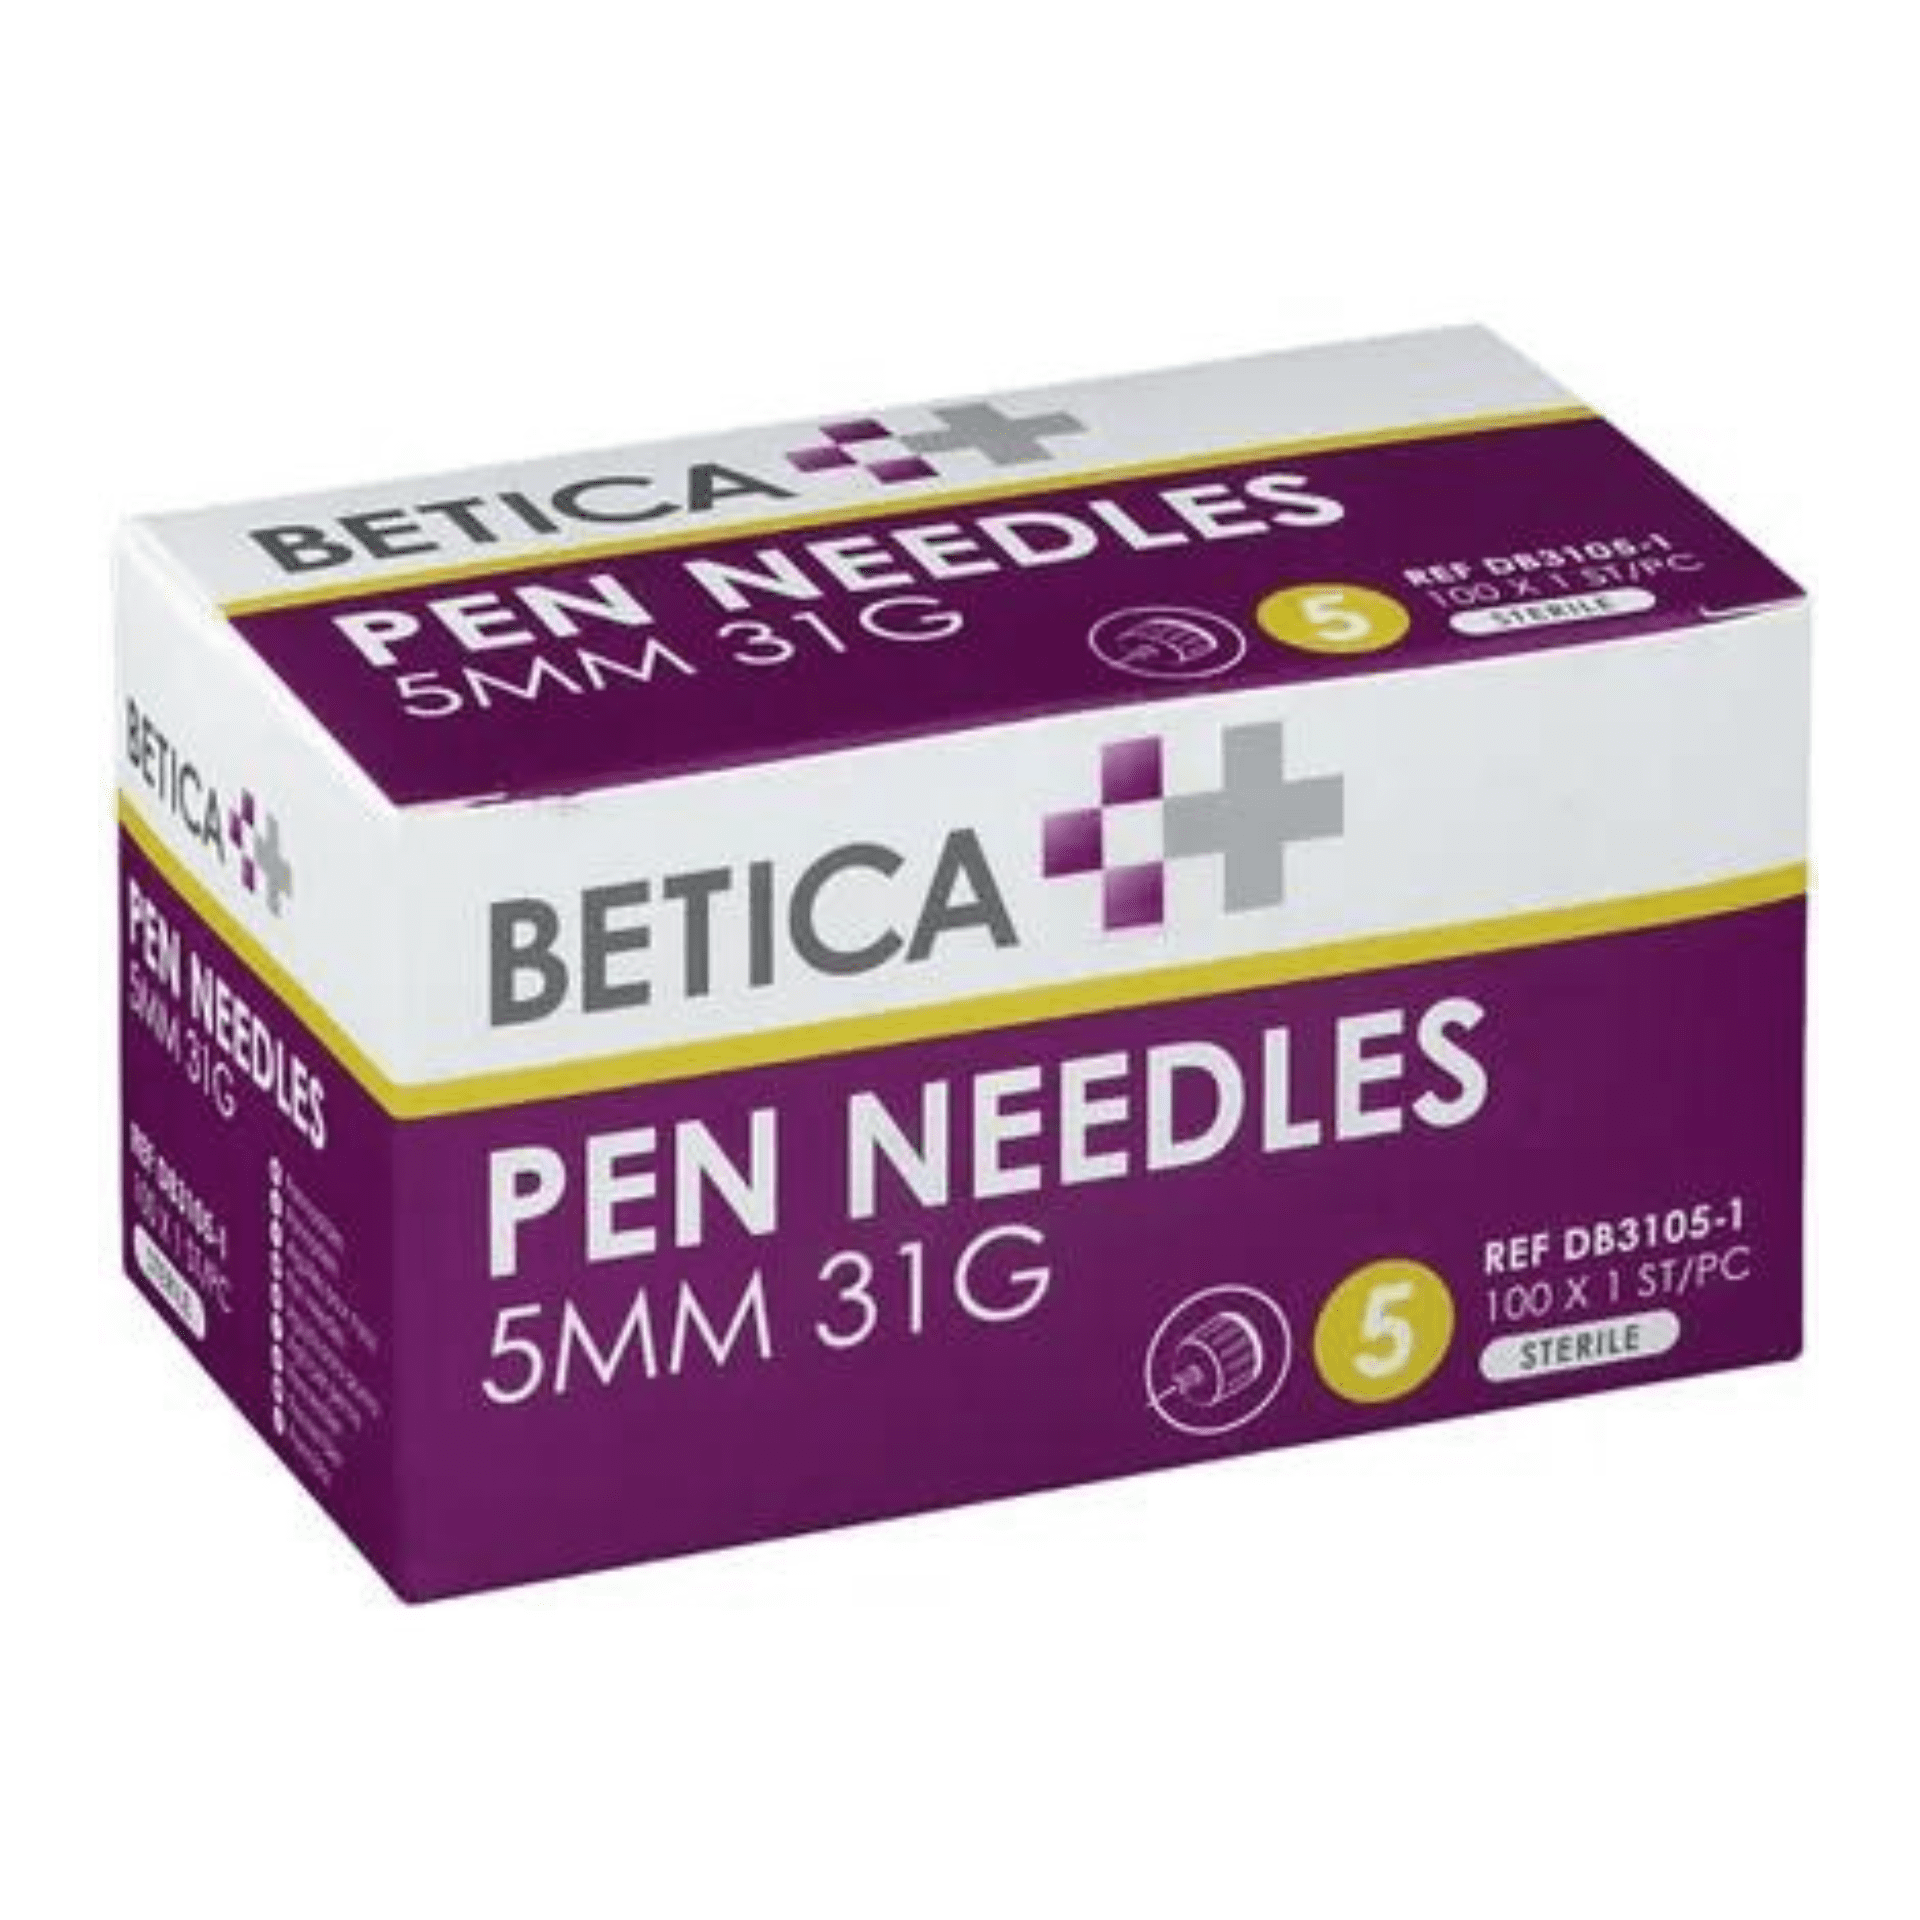 Betica Aiguilles Stylo Inj Doubl Secur.5mm 31g 100